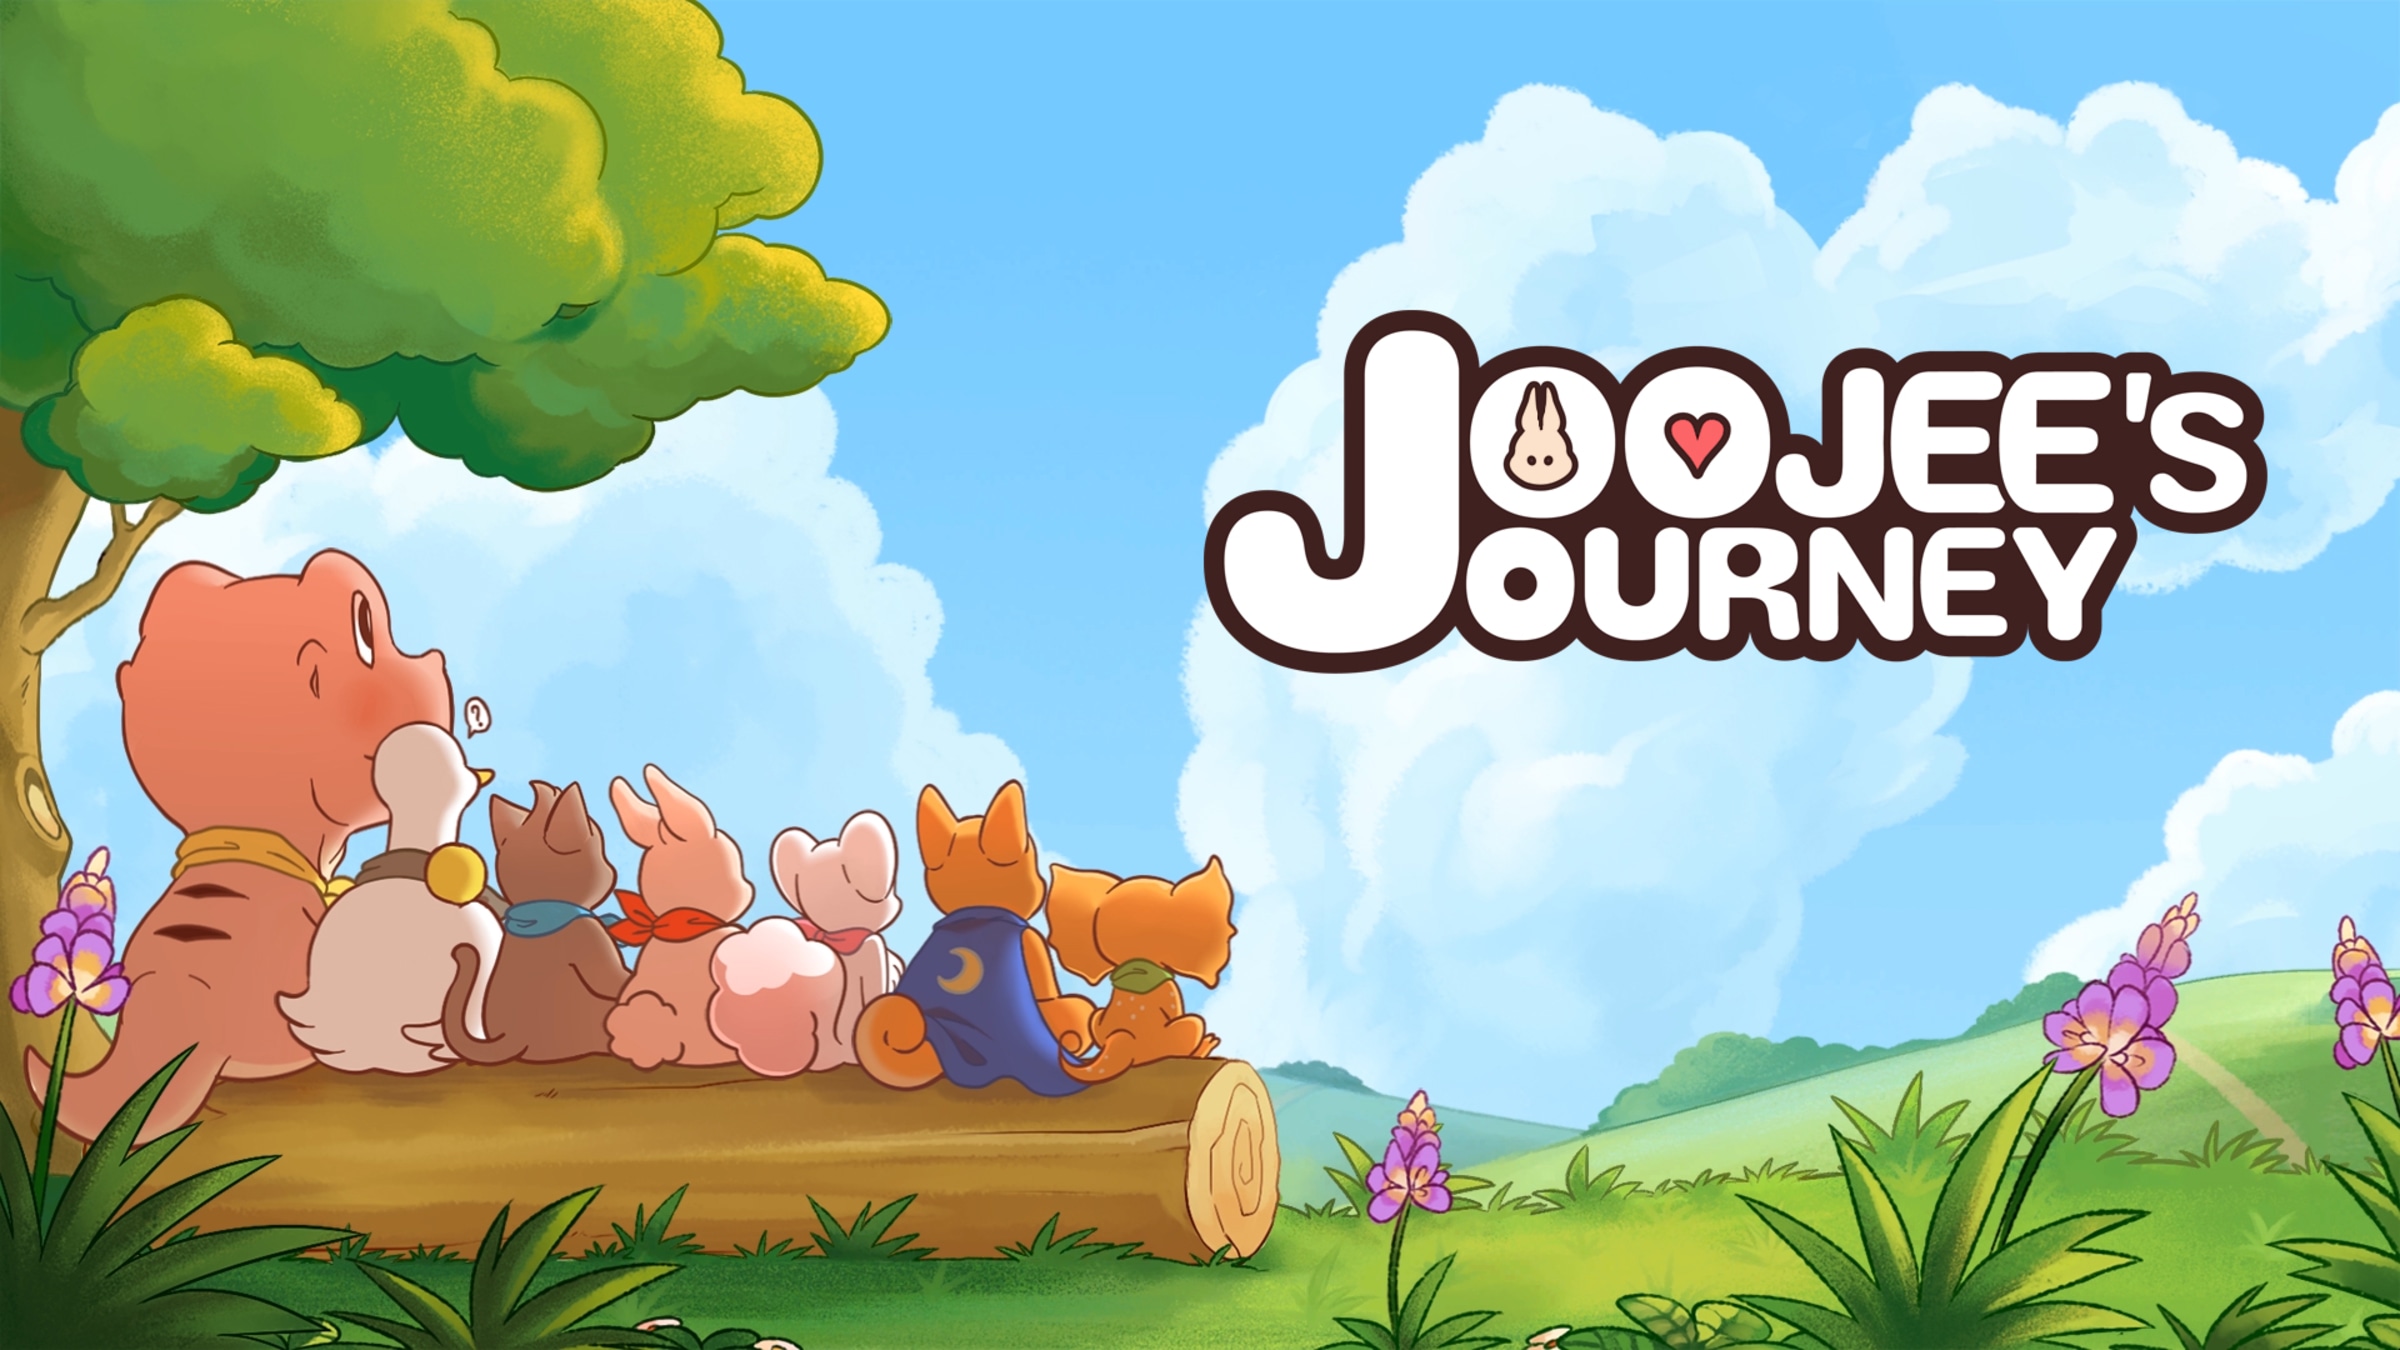 switch journey game